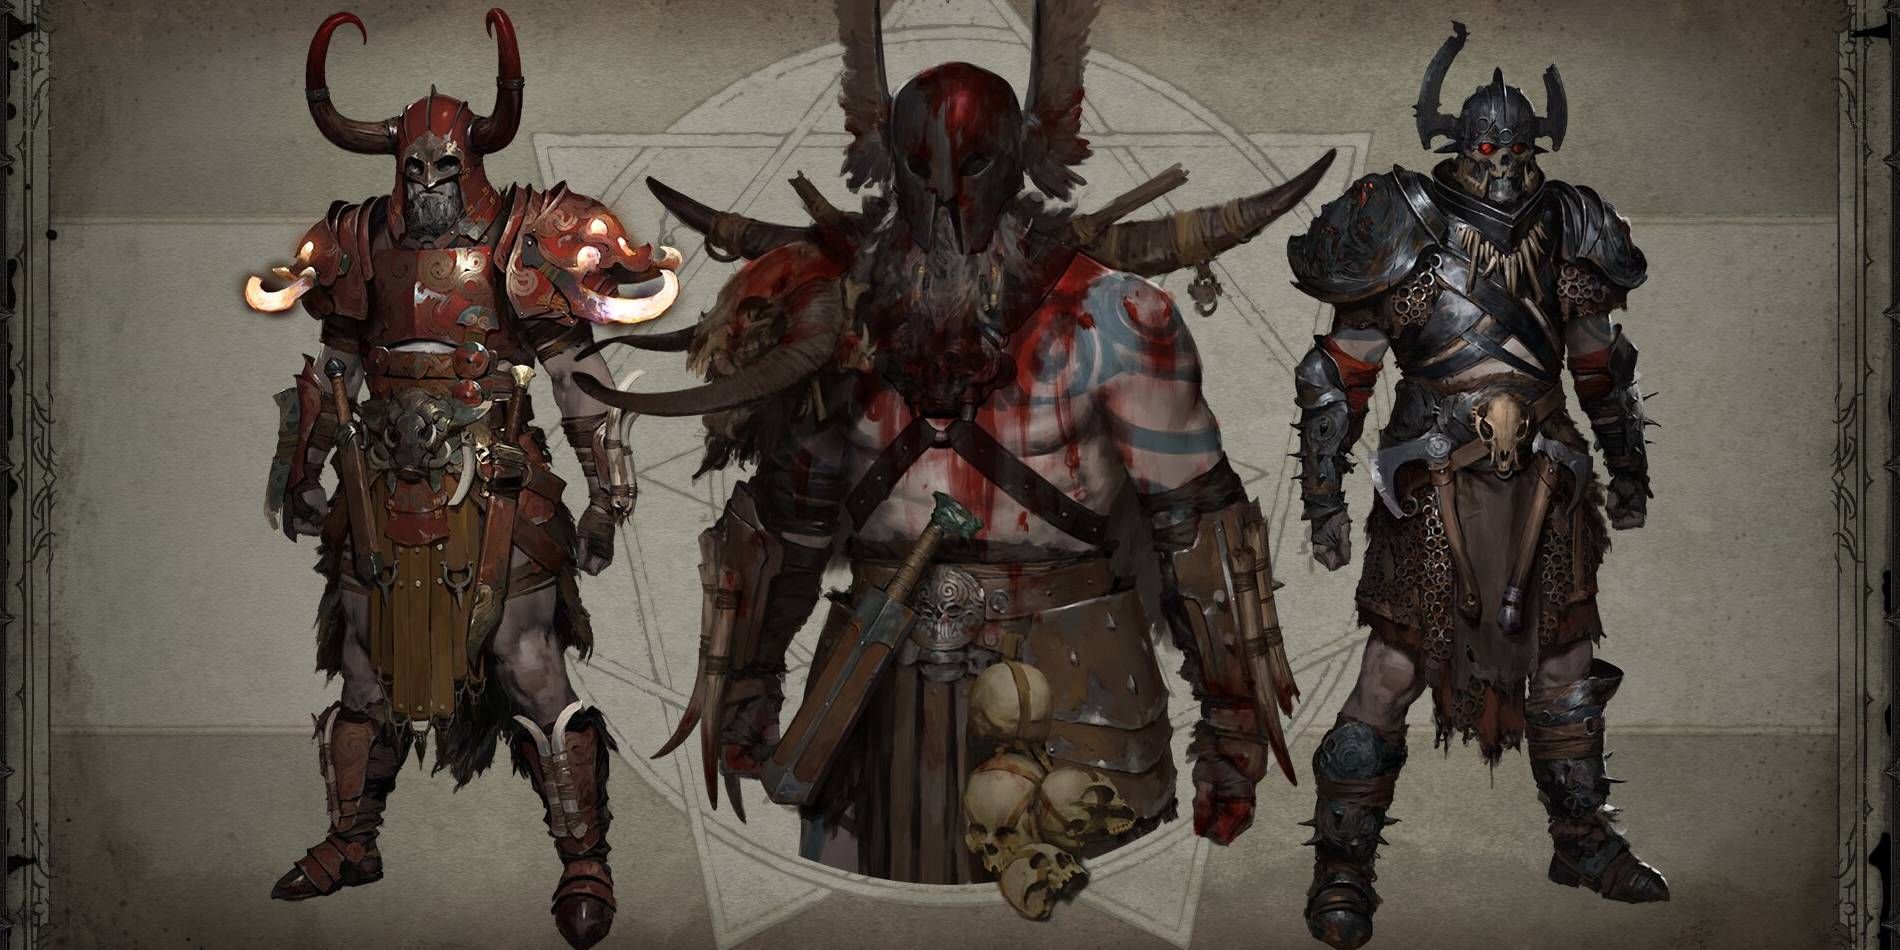 Diablo 4 Beta Barbarian Transmog Options for Gear Appearance with New Items Found from Loot